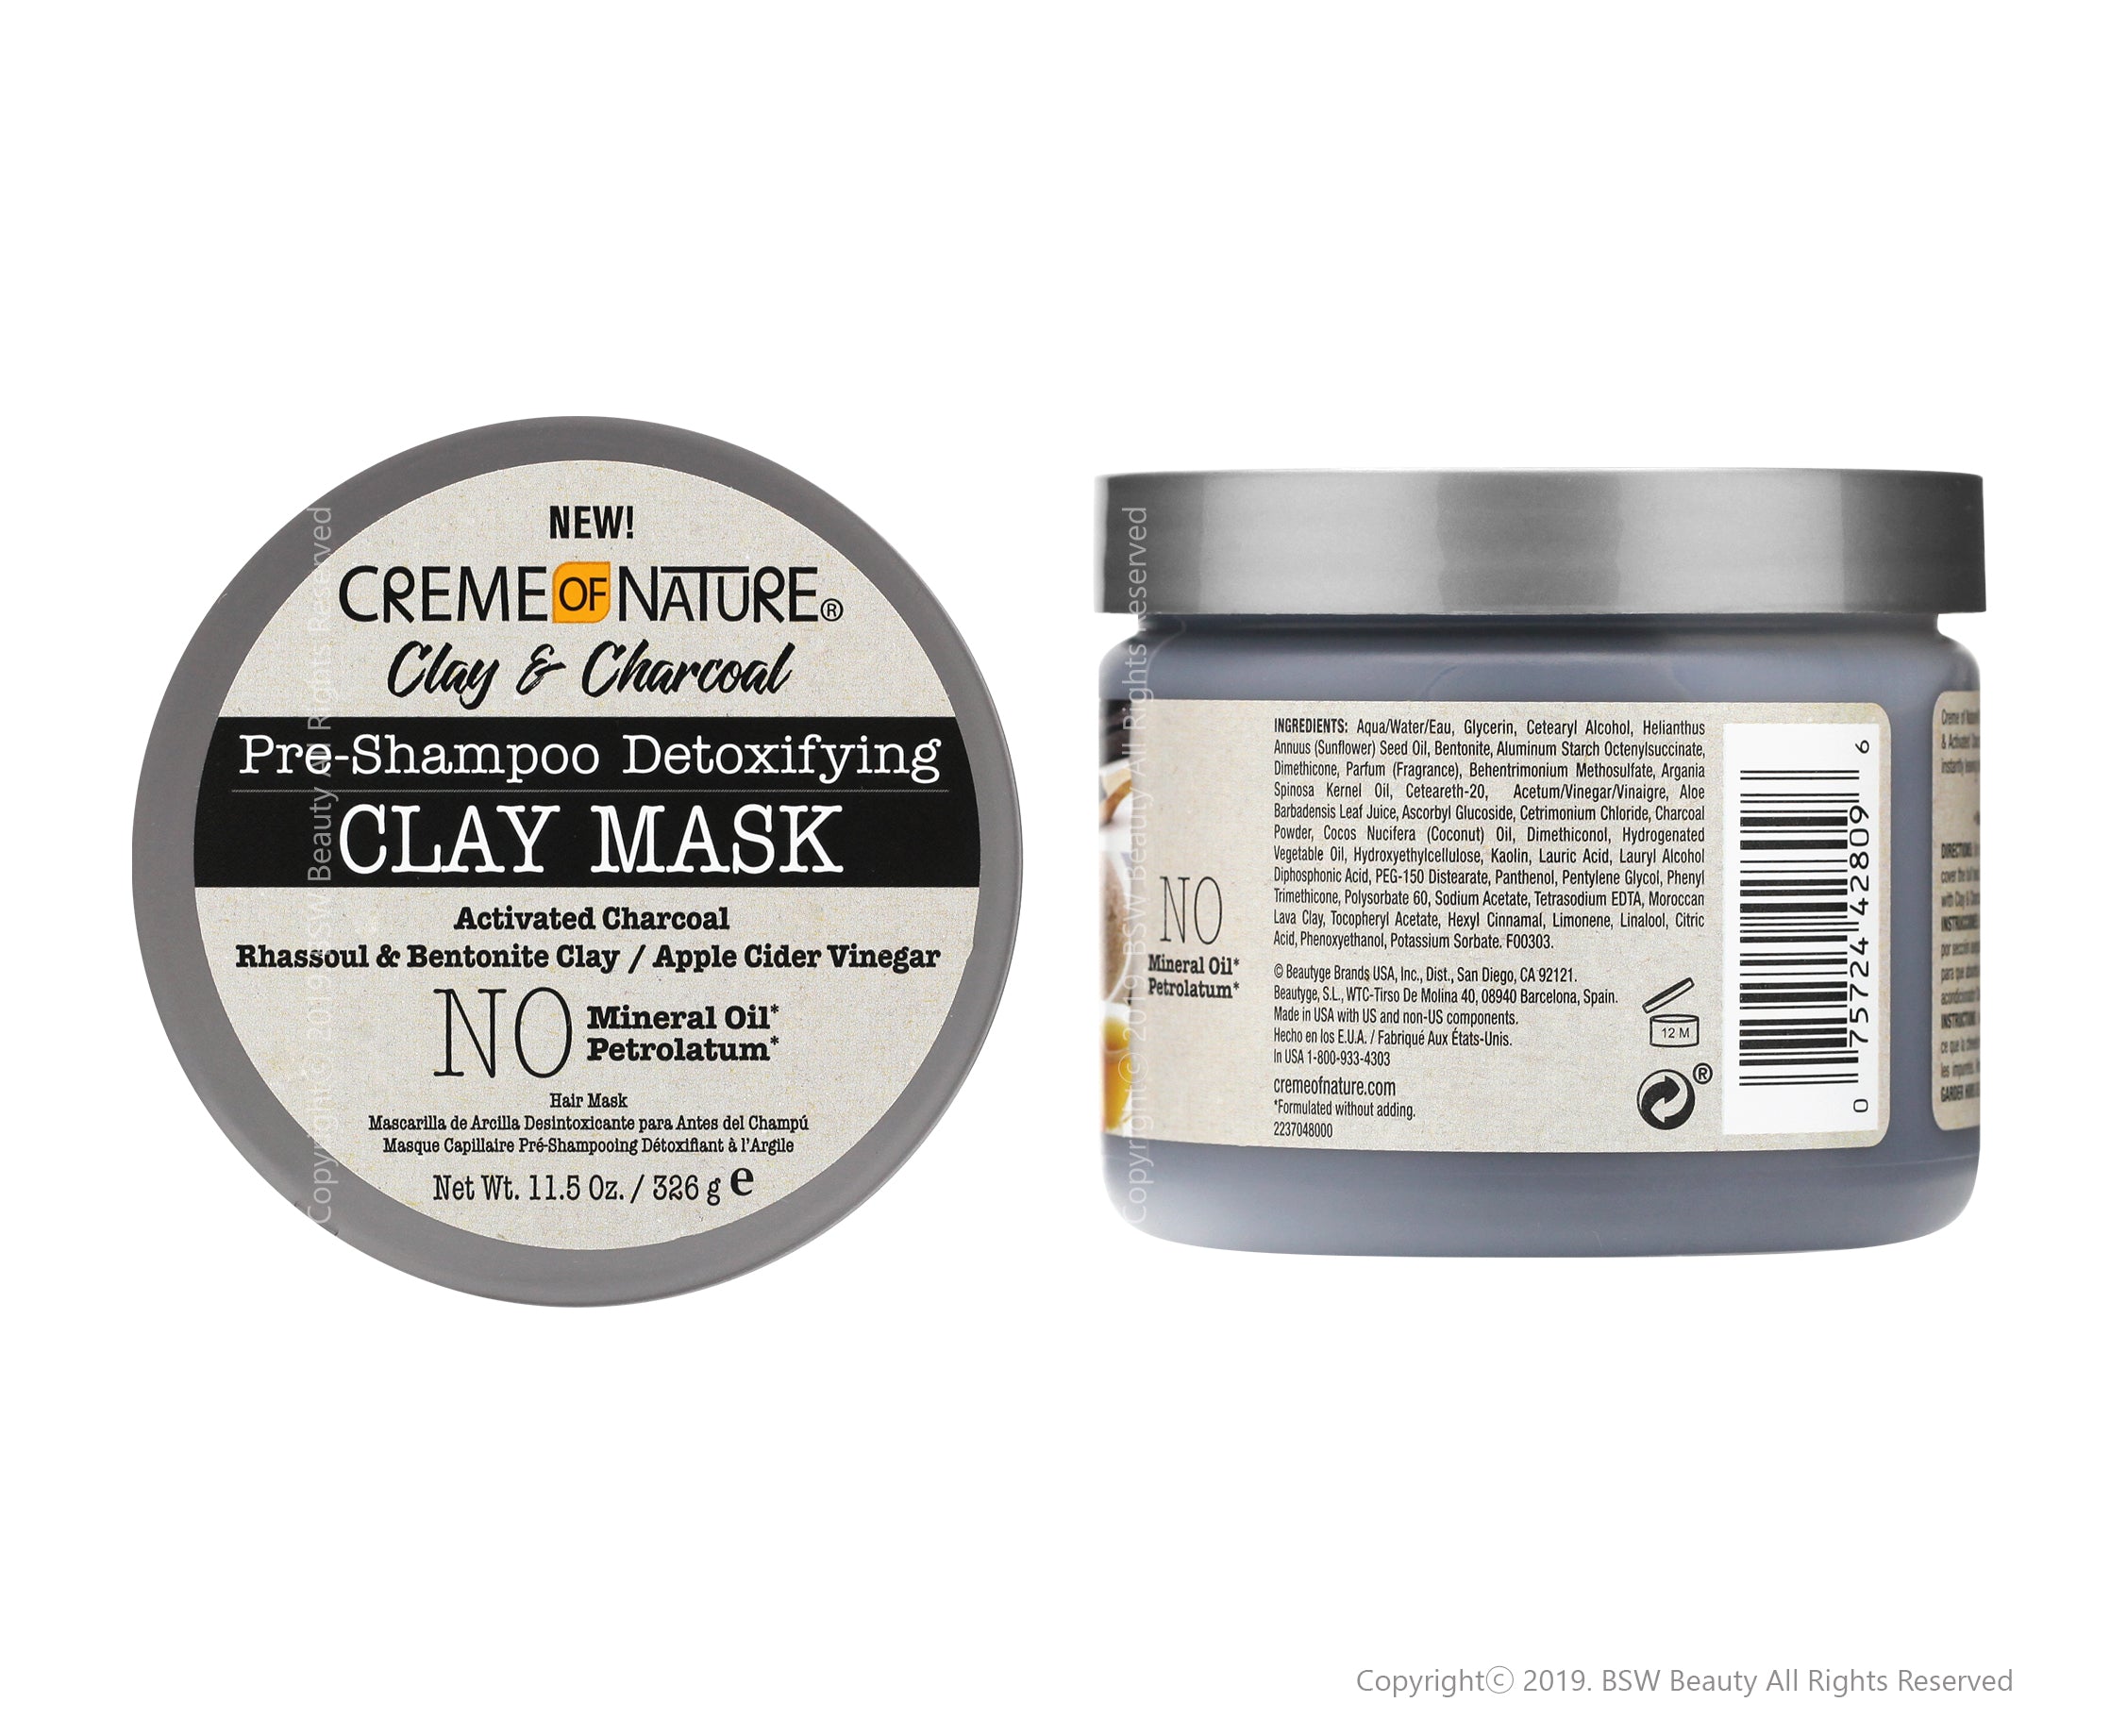 CREME OF NATURE CLAY & CHARCOAL CLAY MASK 11.5oz